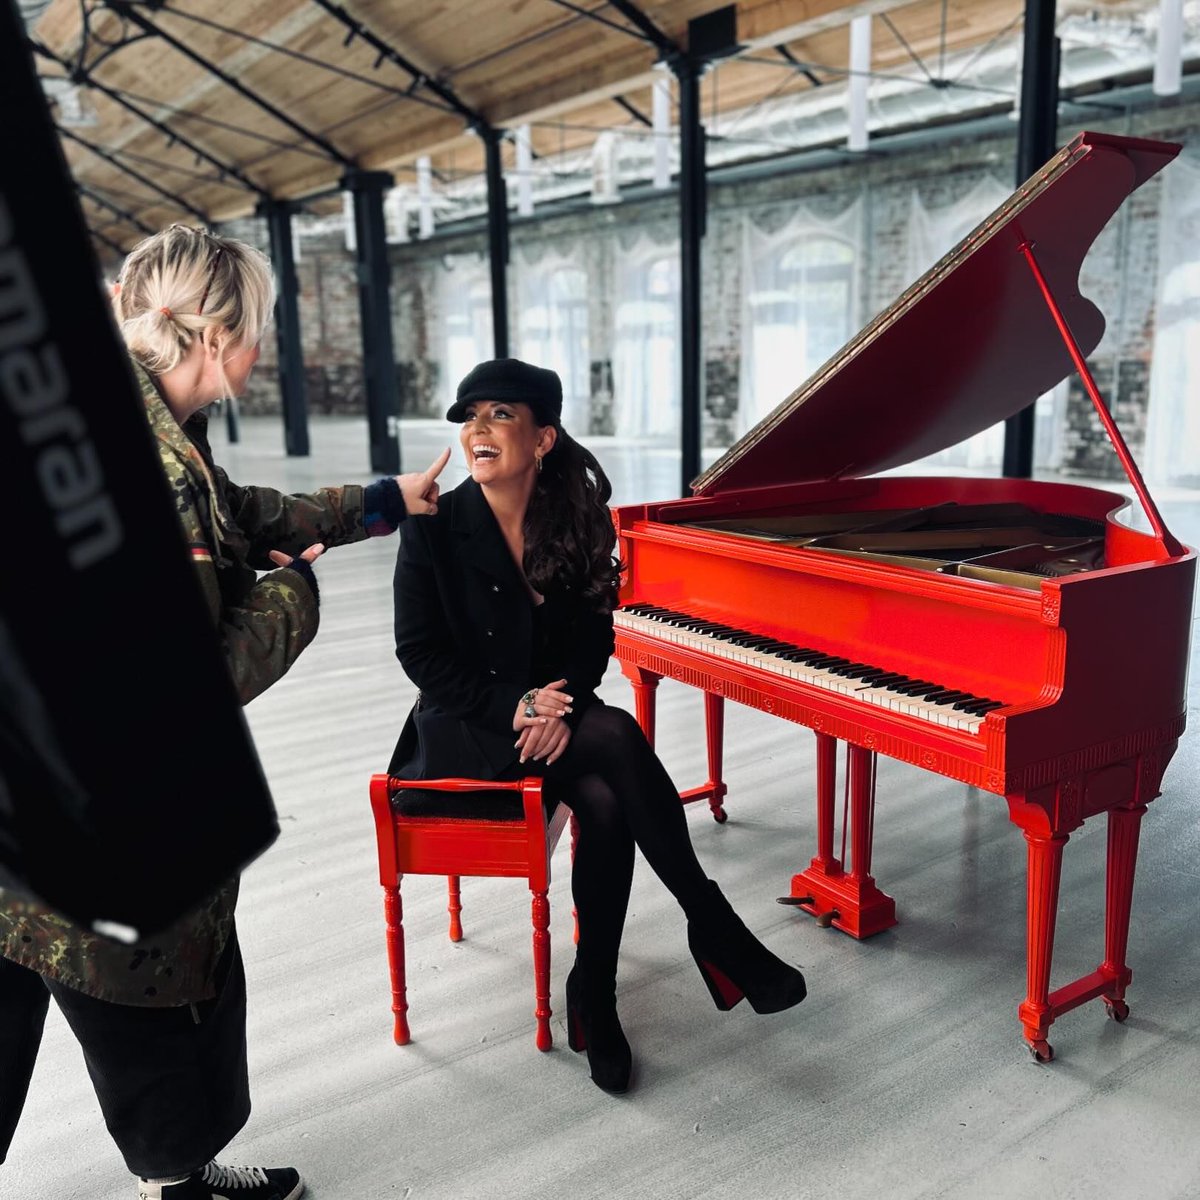 We've LOVED seeing Raquel Reno's #BTS filming a music video for her next single in the Carding Shed. We're excited to see the final product 🎬 Interested in using our creative spaces for filming? Let's chat: loom.ly/Na9sHUQ